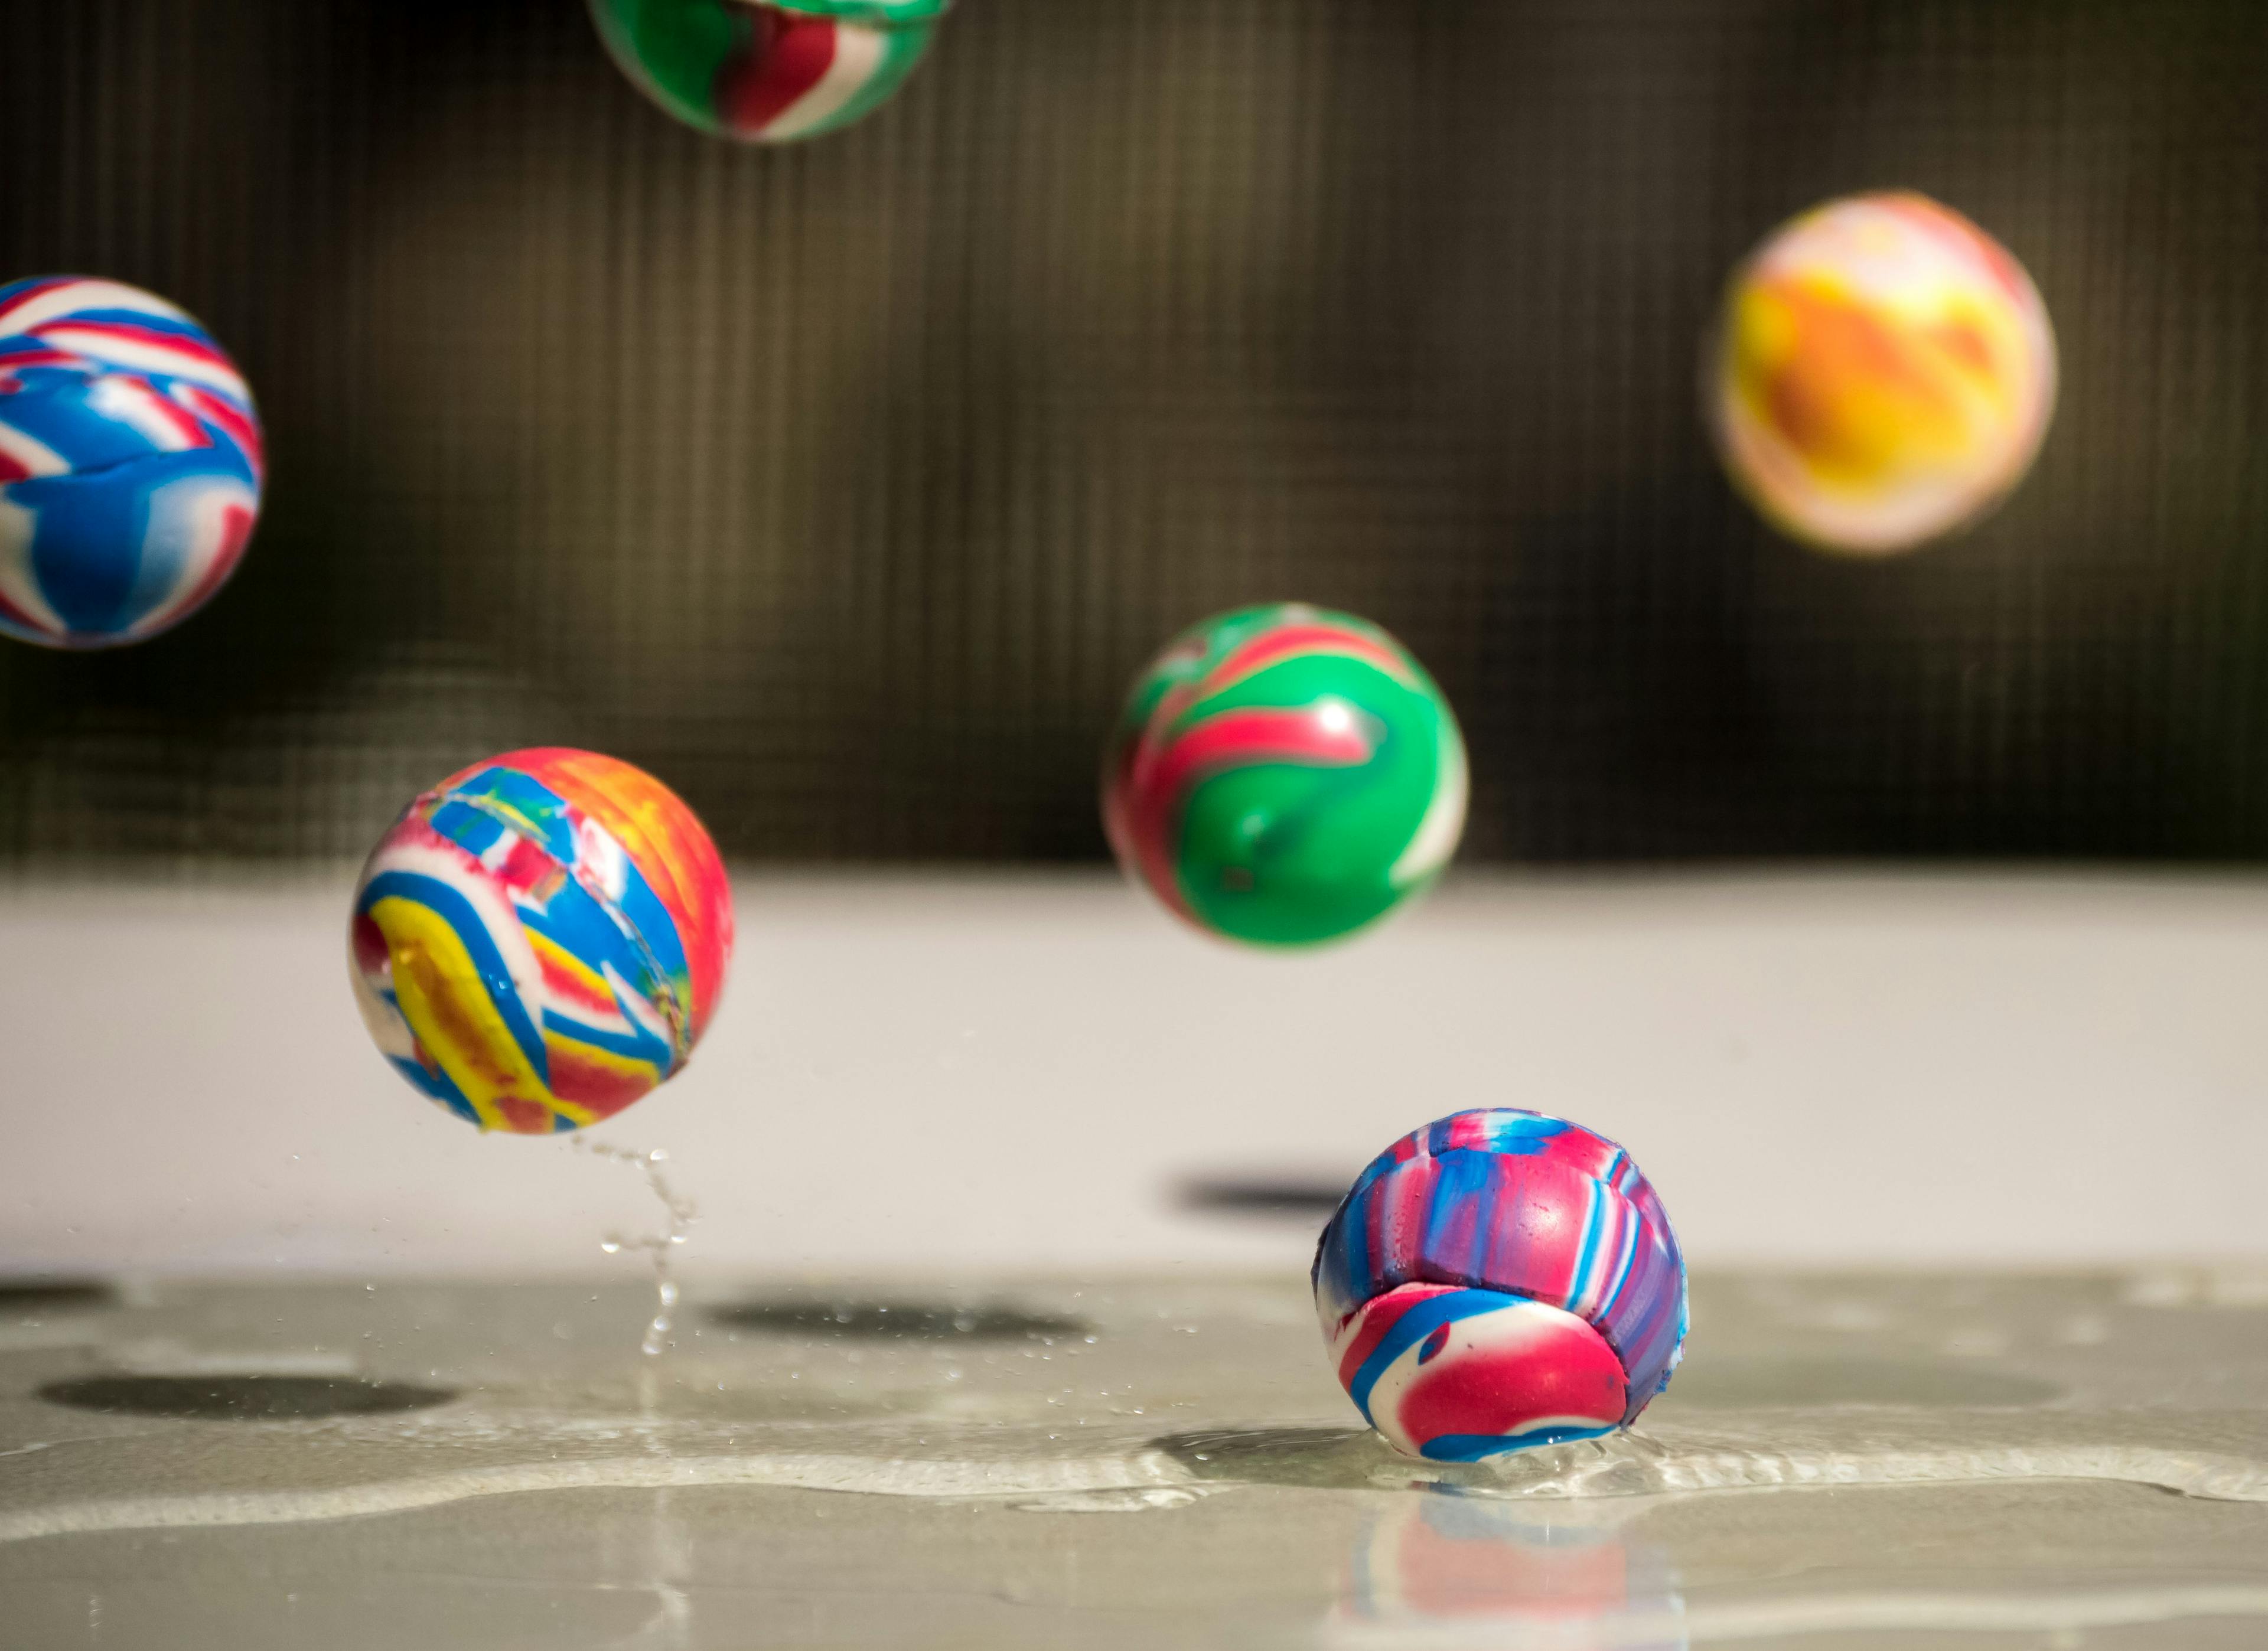 Balls bouncing on a wet surface